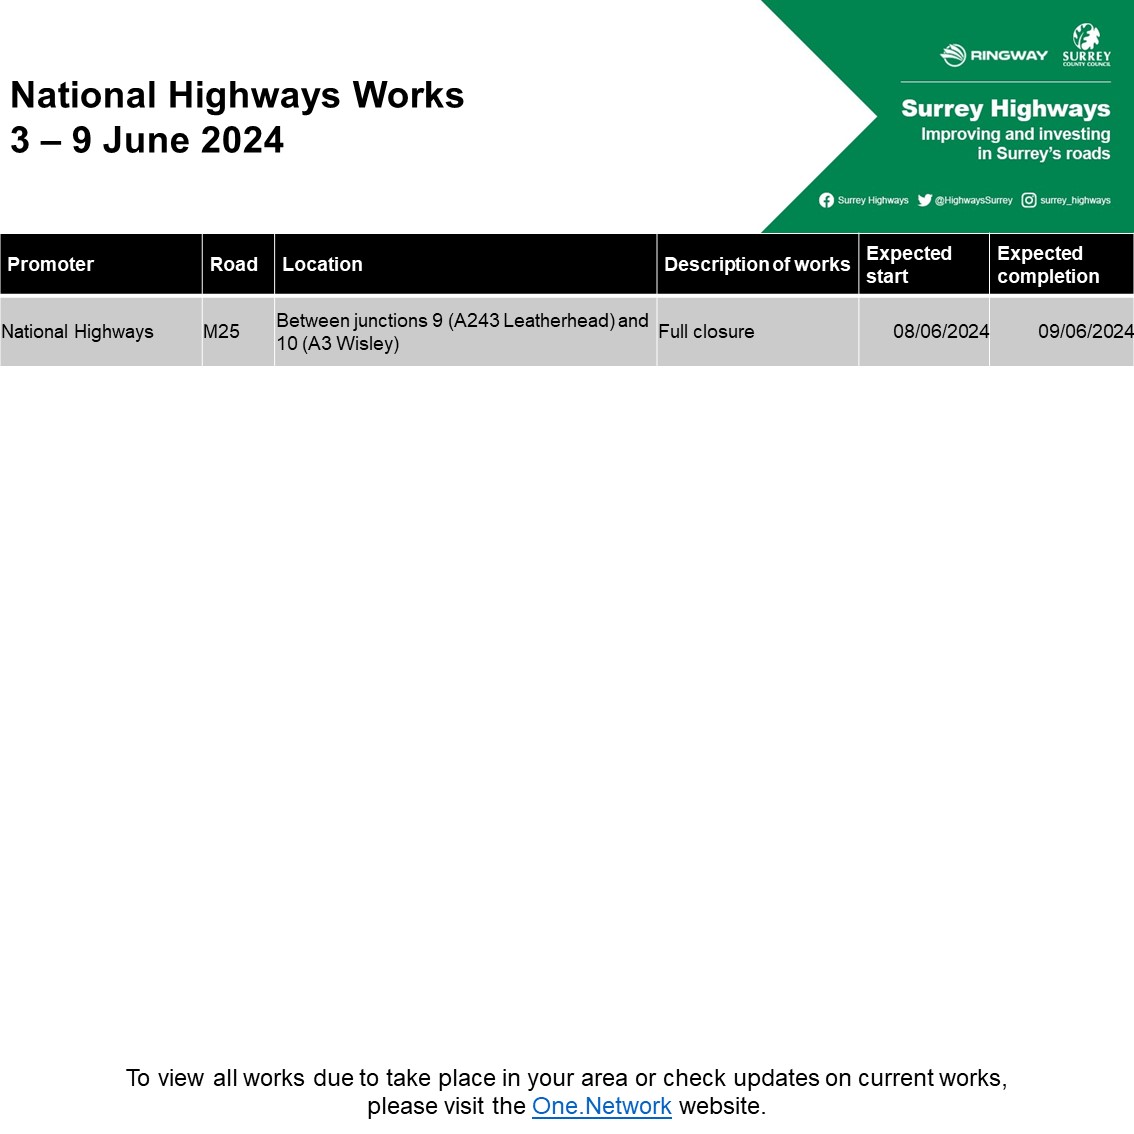 🚦 Tandrdige planned roadworks 🗓️ Week commencing 3/6/24 #Tandridge #Caterham #Oxted #Lingfield #Godstone #SouthNutfield #BlindleyHeath #Whyteleafe #Smallfield @TandridgeDC Please be aware of an upcoming M25 closure by National Highways For more see orlo.uk/4sJTX